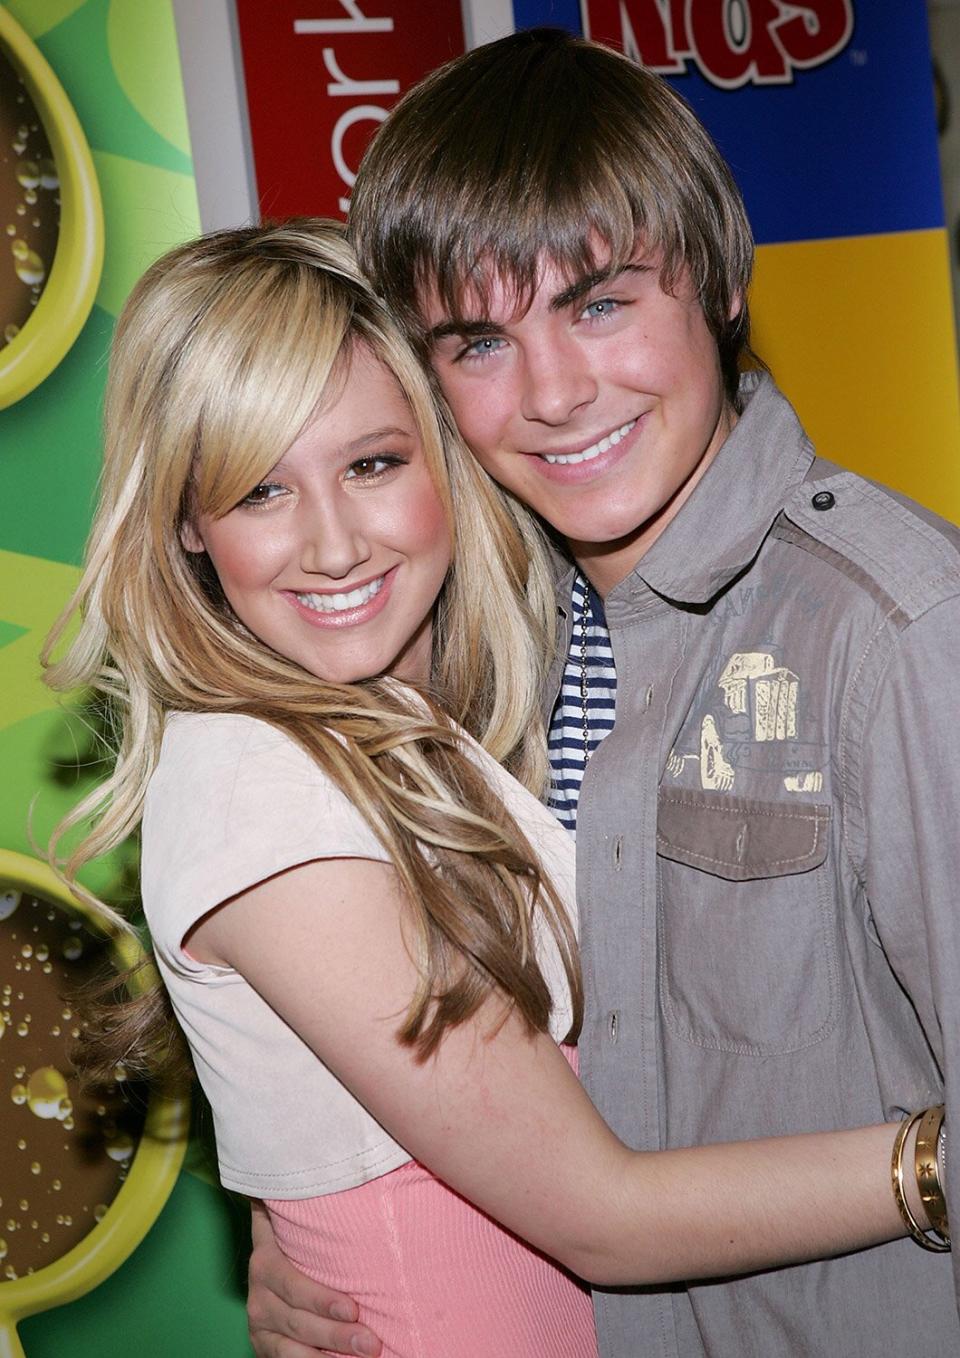 NEW YORK - FEBRUARY 09: Disney Channel actors Ashley Tisdale and Zac Efron pose as Stars of the Disney Channel appear at Splashlight Studios February 9, 2006 in New York City. (Photo by Paul Hawthorne/Getty Images)